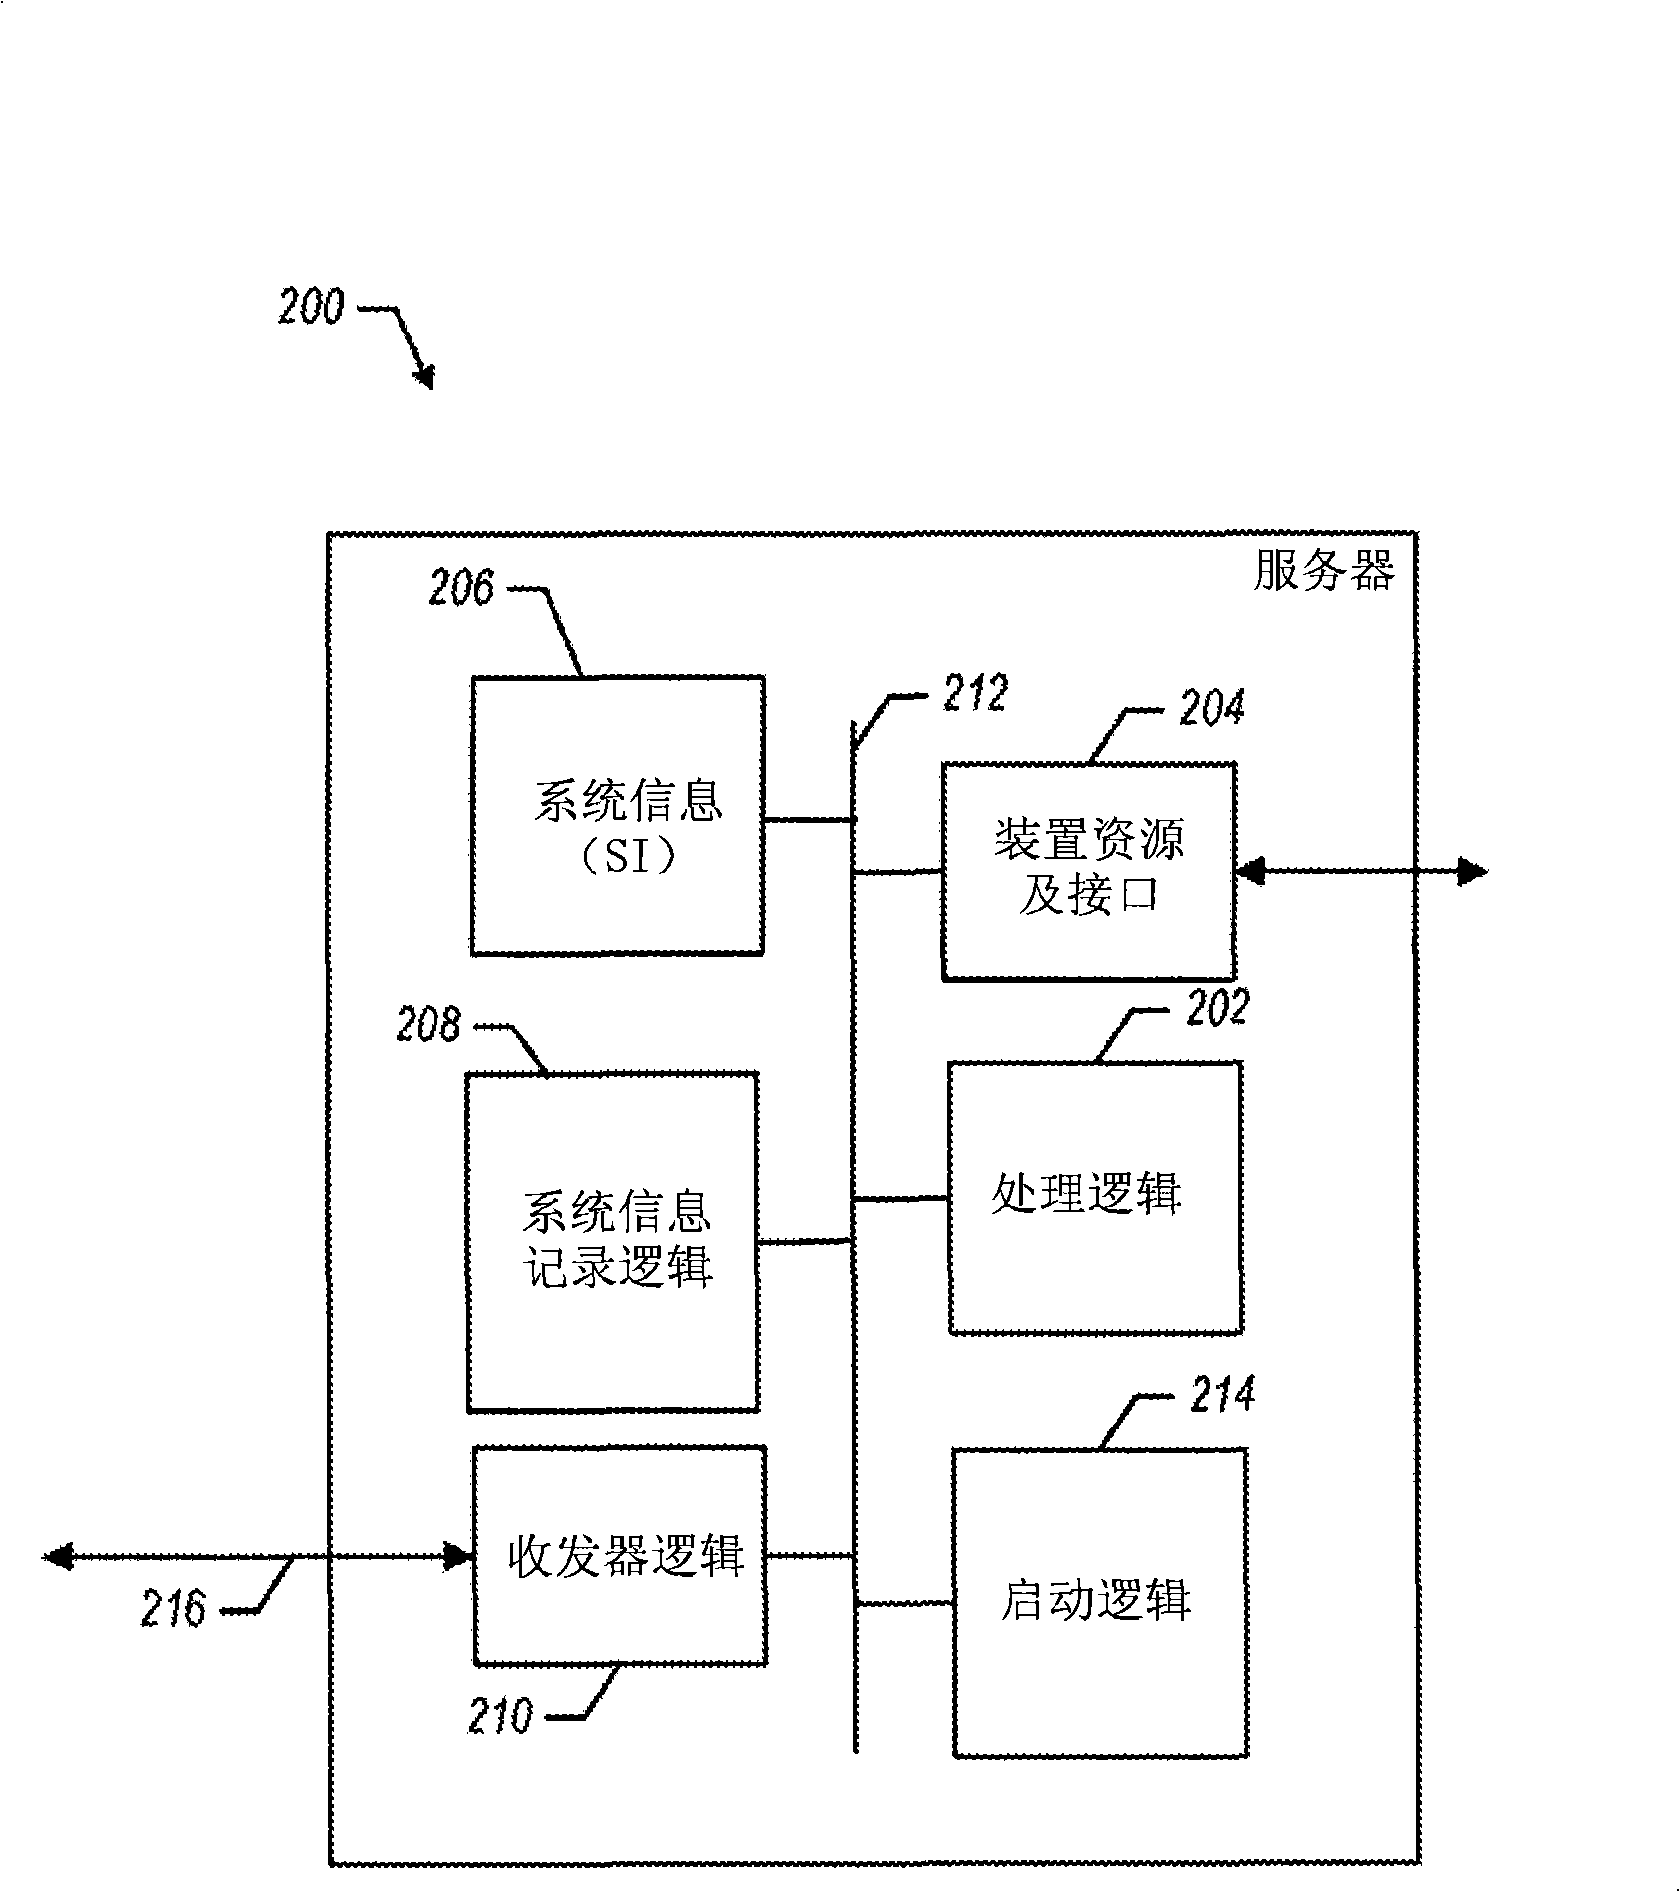 Communication of notifications in a wireless broadcast network